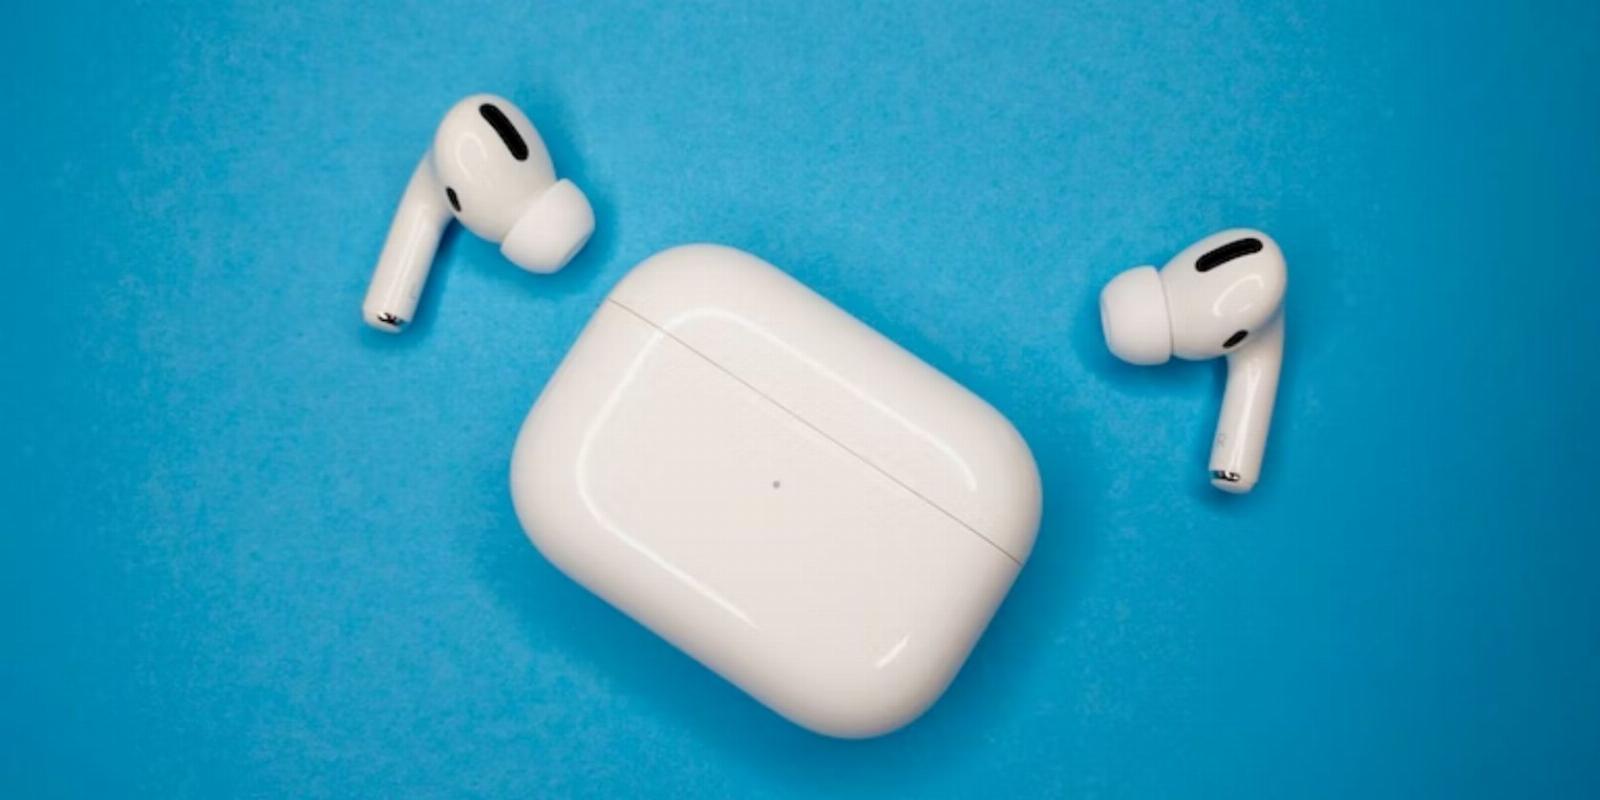 9 Fixes When Your AirPods or AirPods Case Isn’t Charging